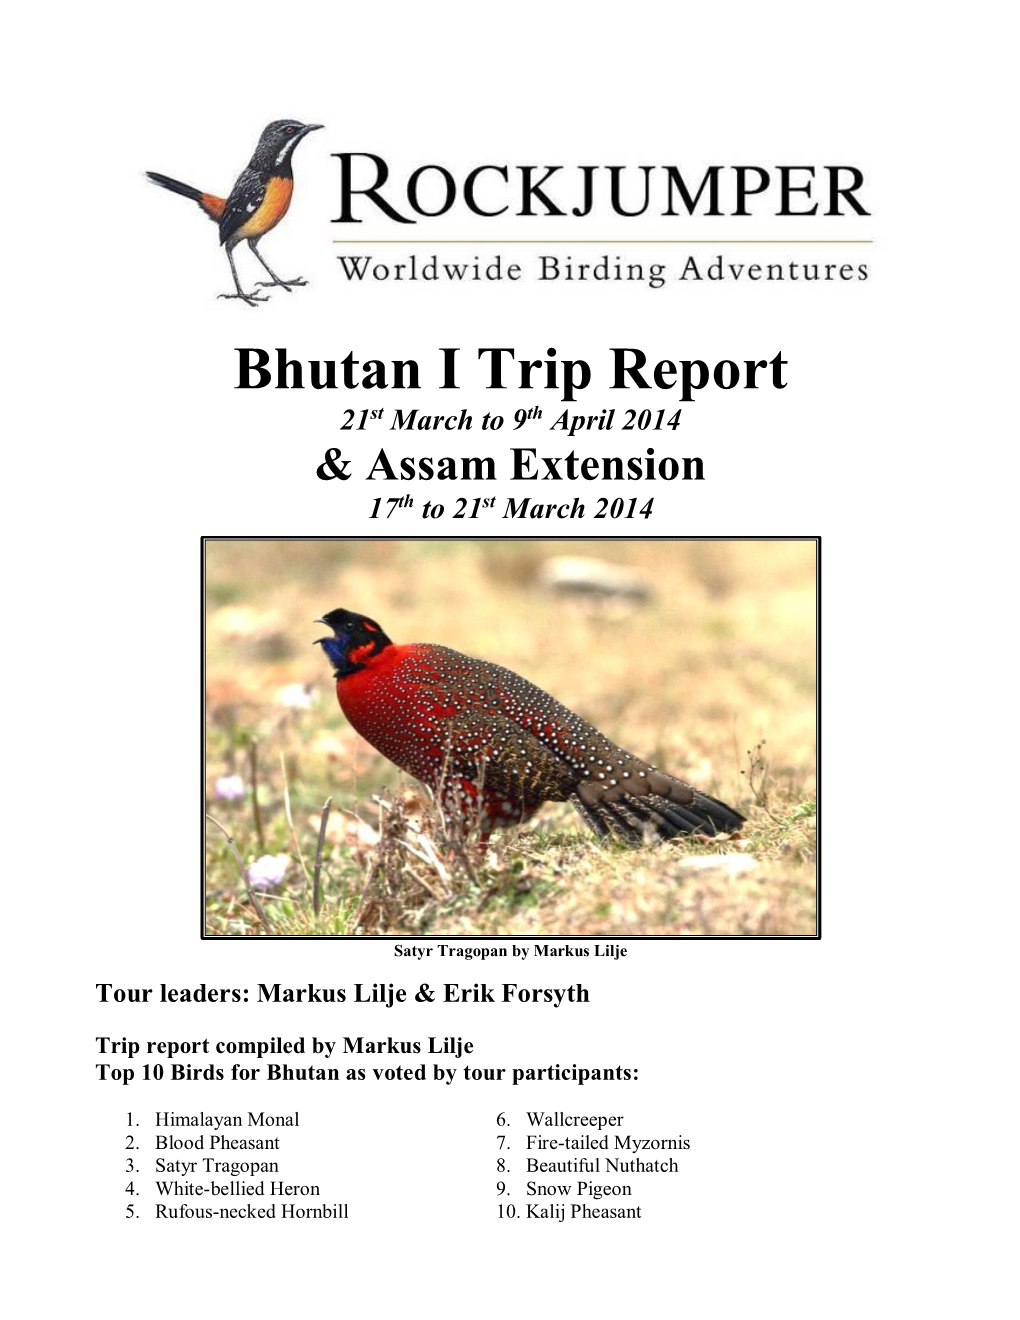 Bhutan I Trip Report 21St March to 9Th April 2014 & Assam Extension 17Th to 21St March 2014